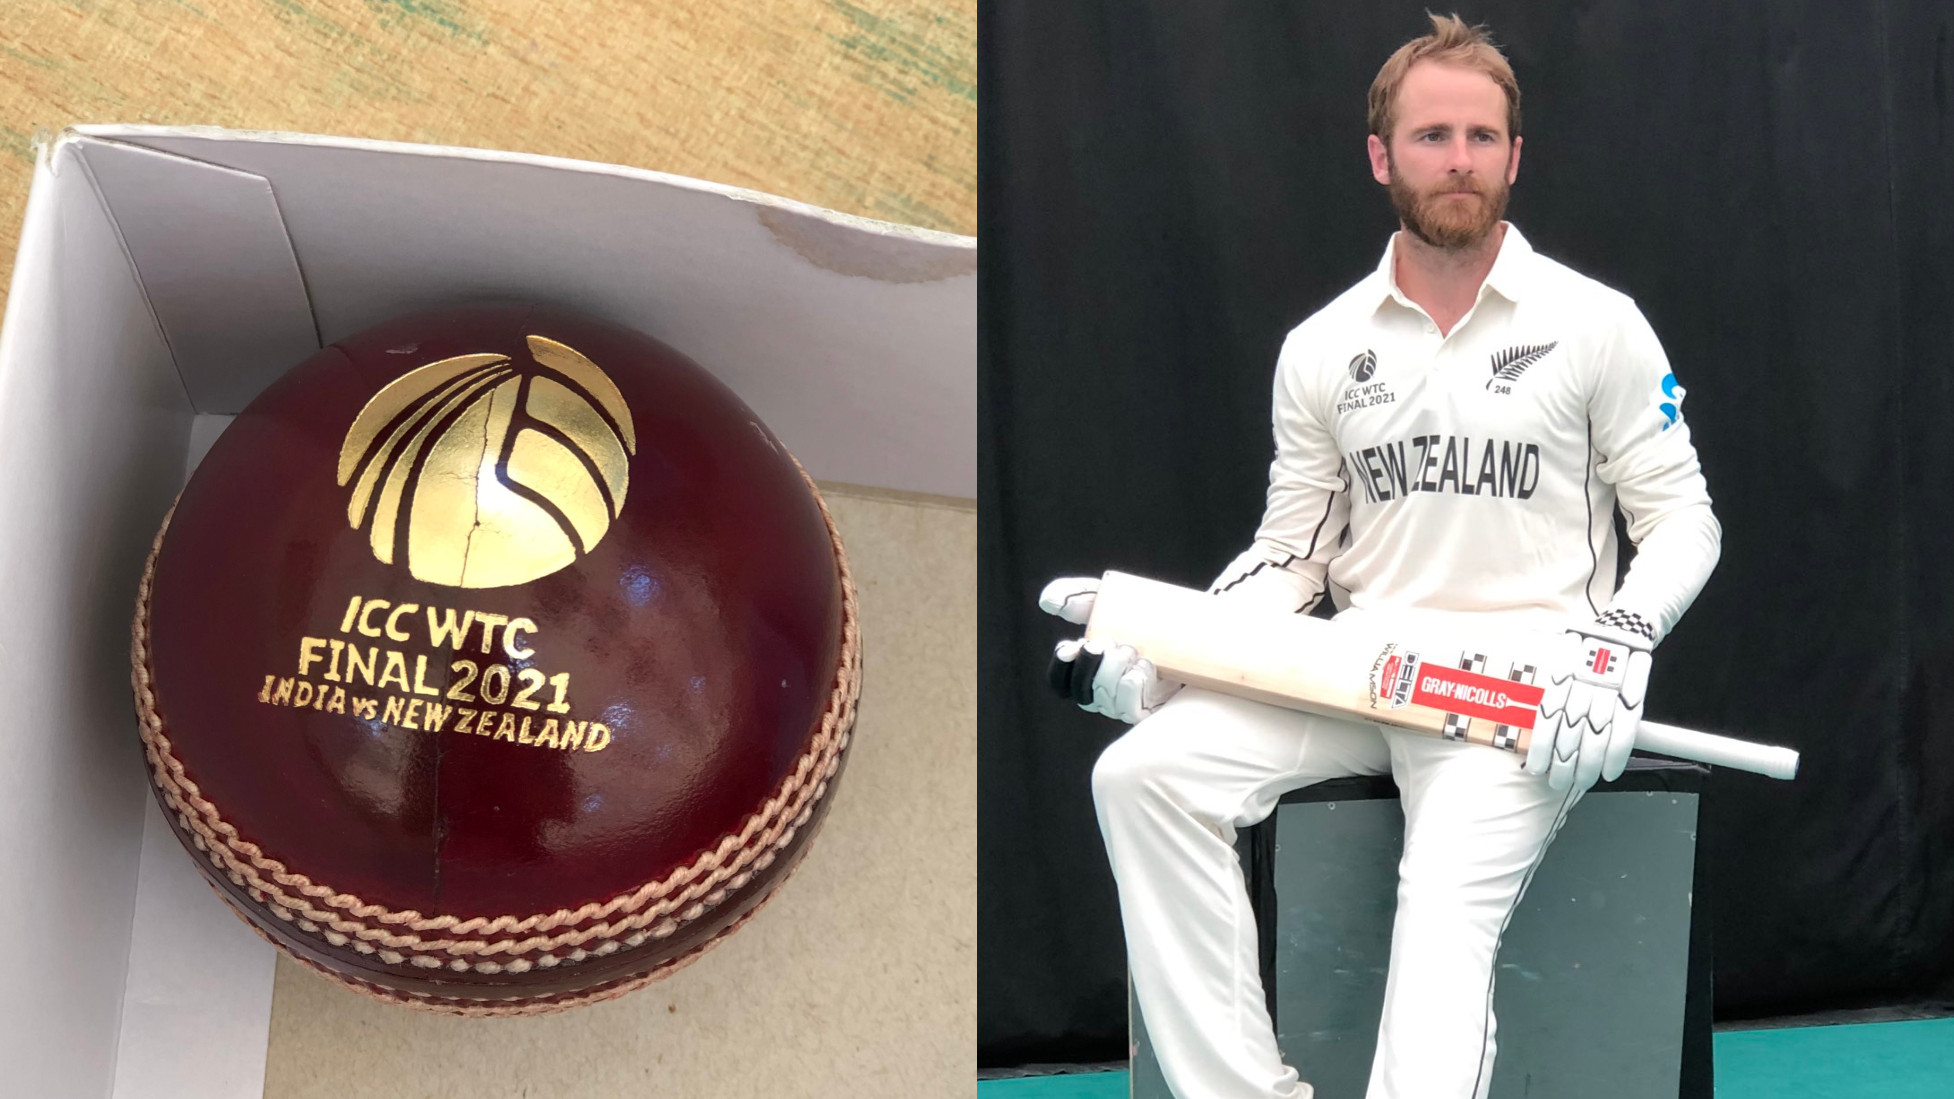 New Zealand reveal the special ball and jerseys for the WTC 2021 Final